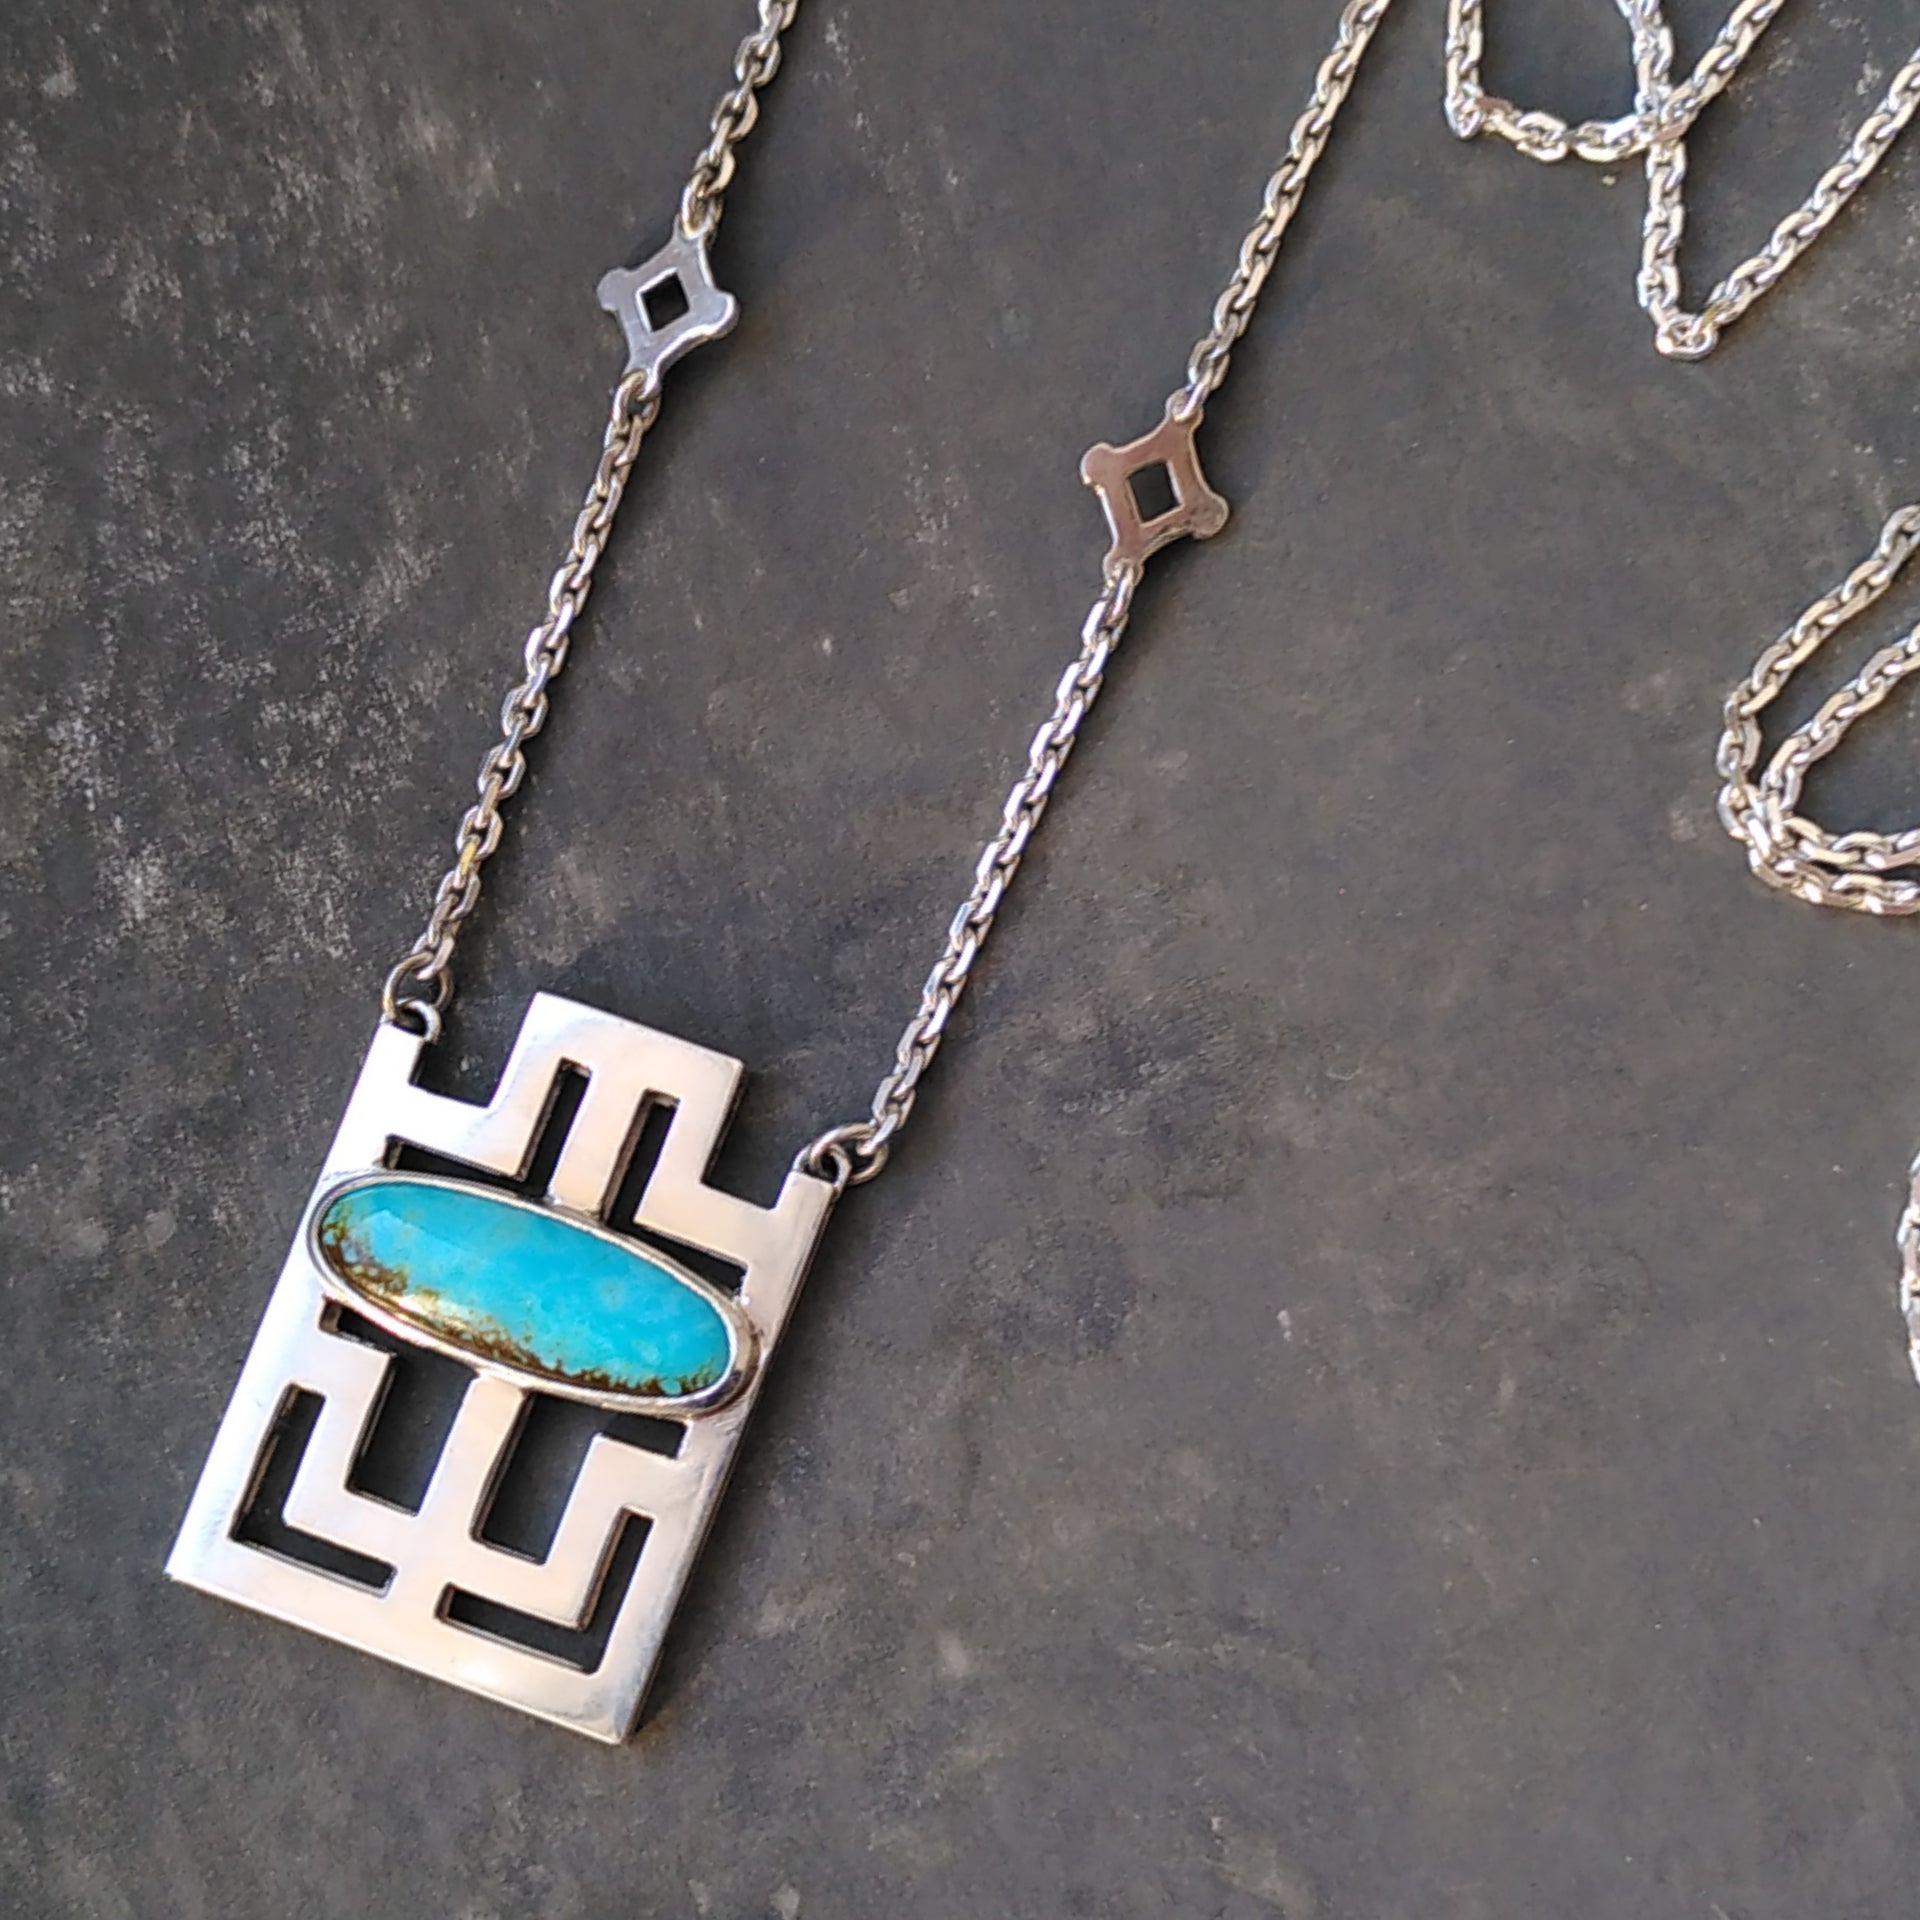 A pendant in the geometric shapes inspired from a key from the middle ages. Displays an oval turquoise cabochon in the middle. Made by hand by CASEZ Jewellery.